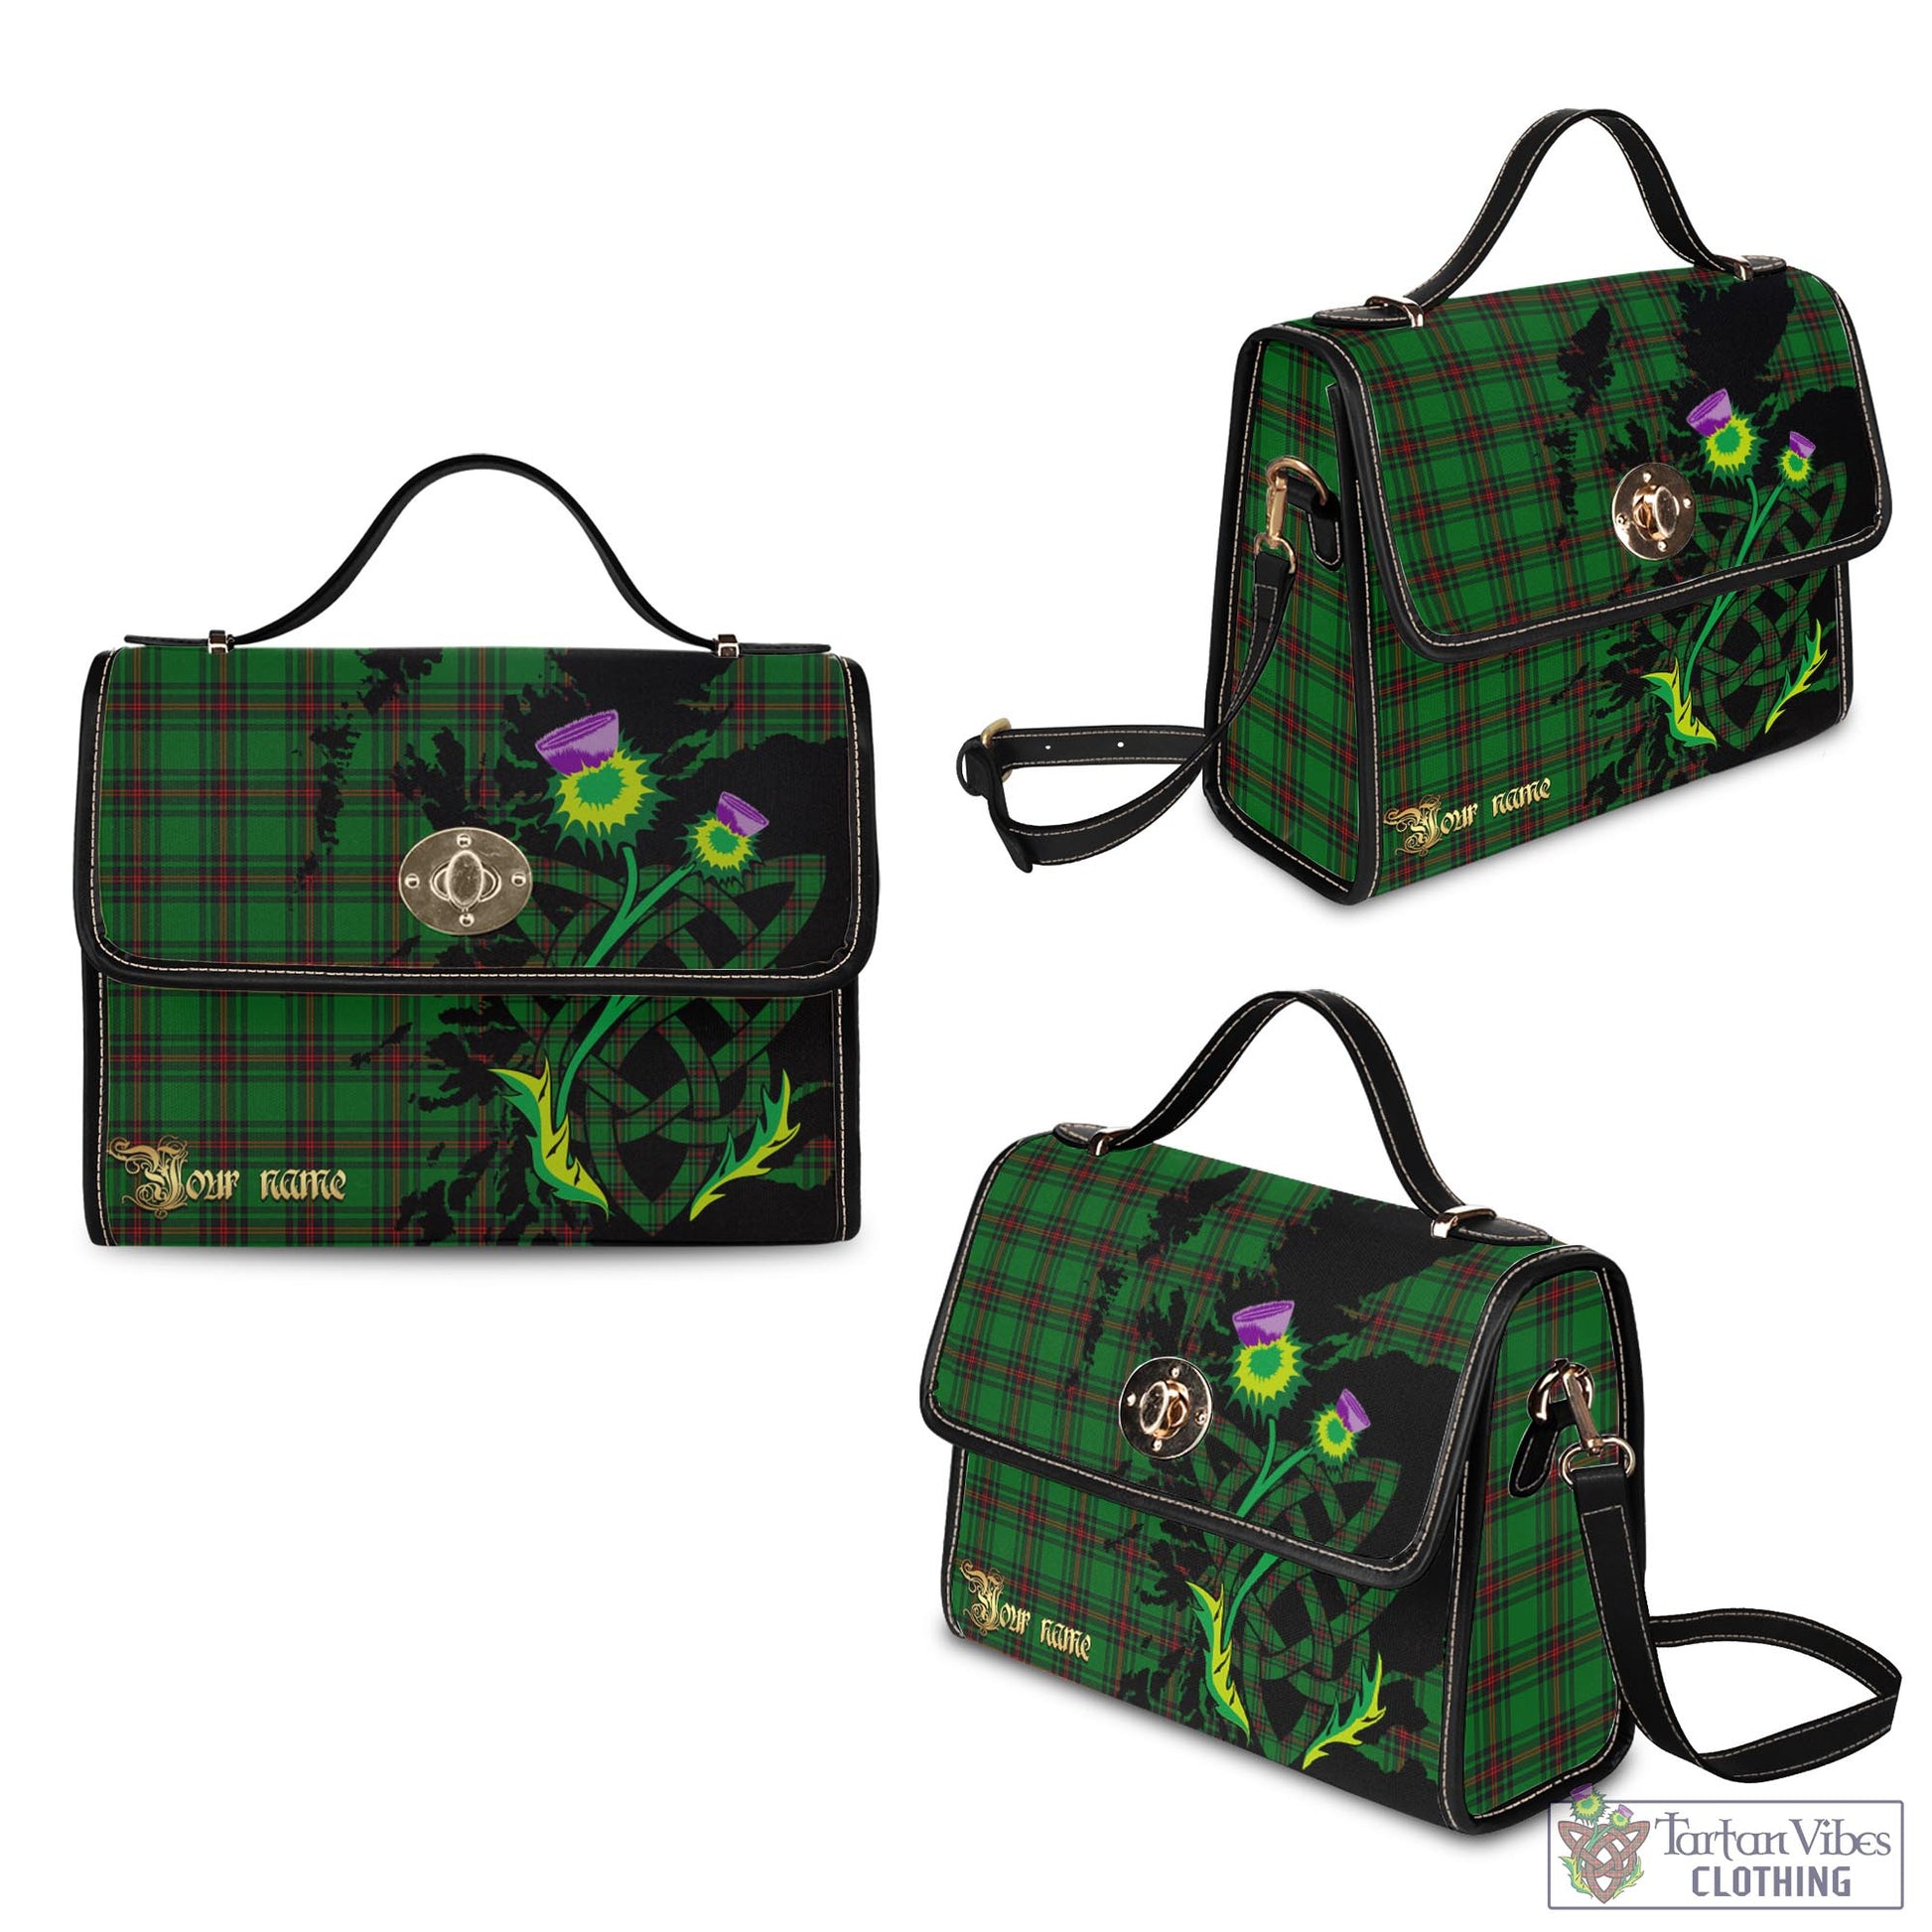 Tartan Vibes Clothing Logie Tartan Waterproof Canvas Bag with Scotland Map and Thistle Celtic Accents